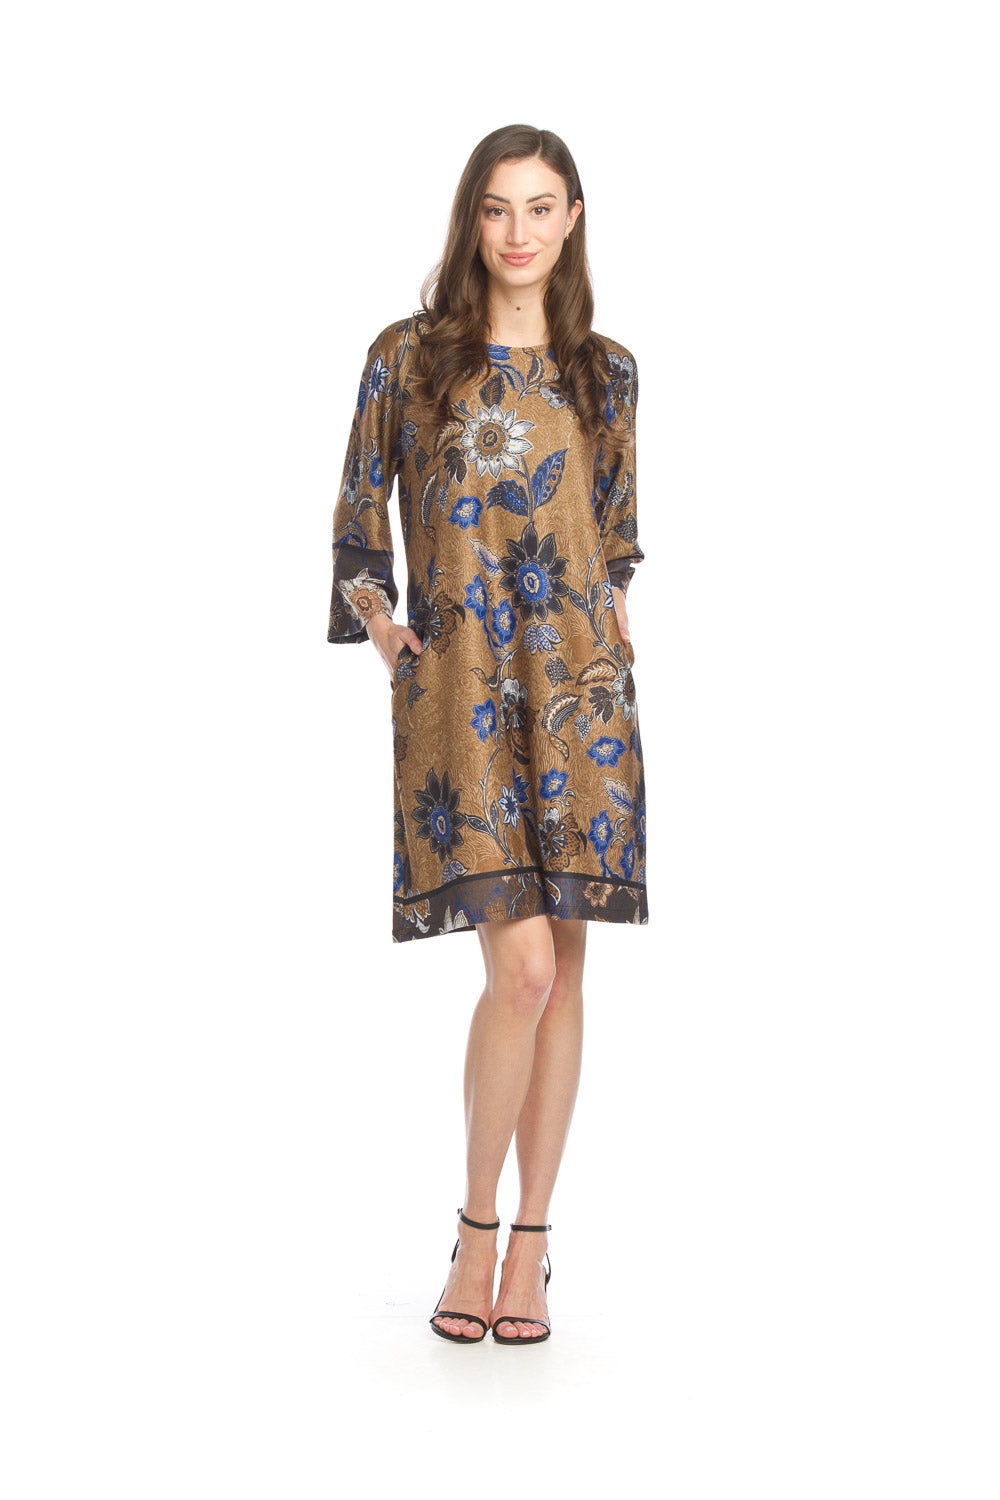 SD-15403 - Paisley and Floral Border Print Sweater Dress with Pockets